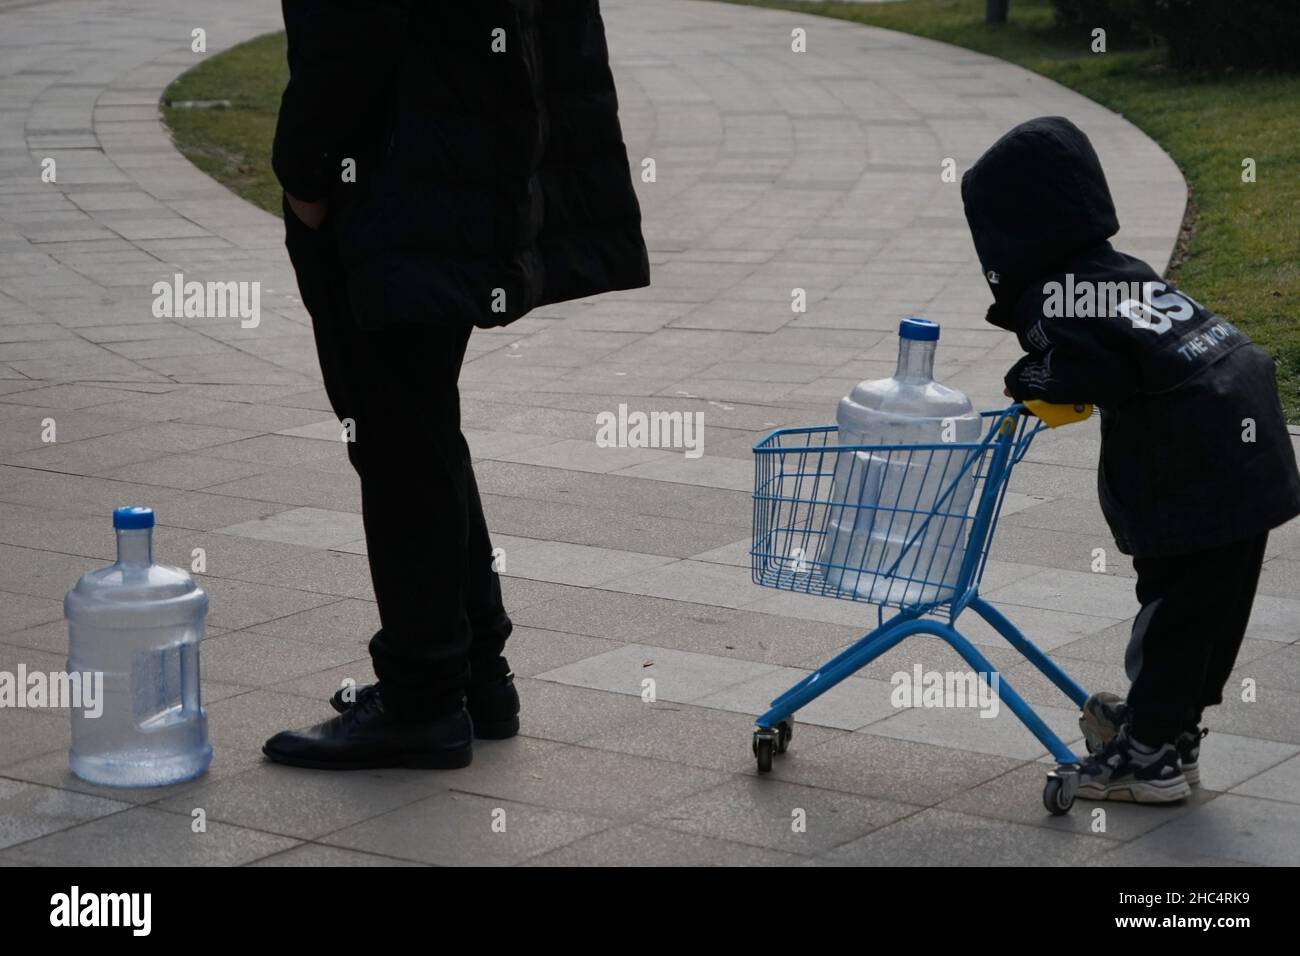 XI'AN, CHINA - DECEMBER 24, 2021 - Residents wait to buy bottled purified water in a gated community in Xi 'an, Shaanxi Province, China, Dec. 24, 2021 Stock Photo